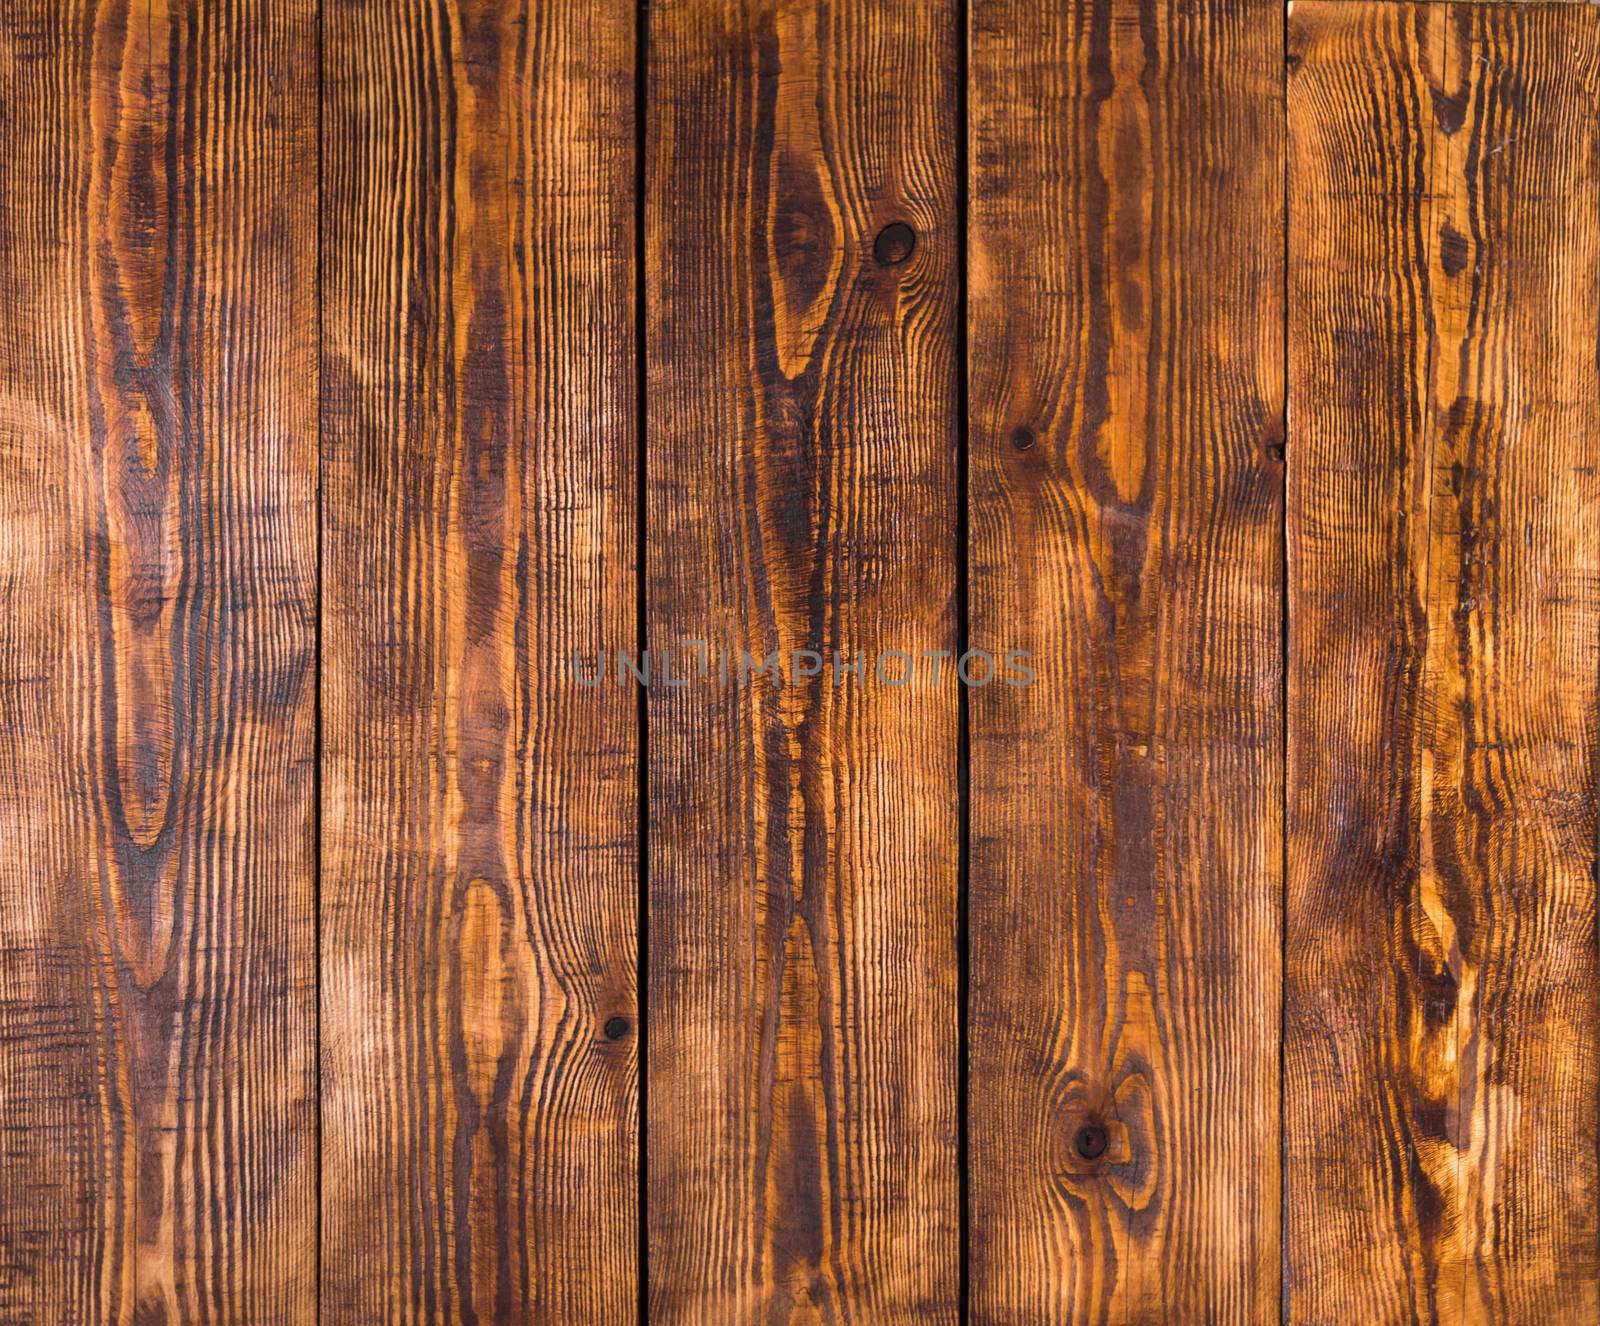 Old wooden panels with cracks and scratches by Seva_blsv